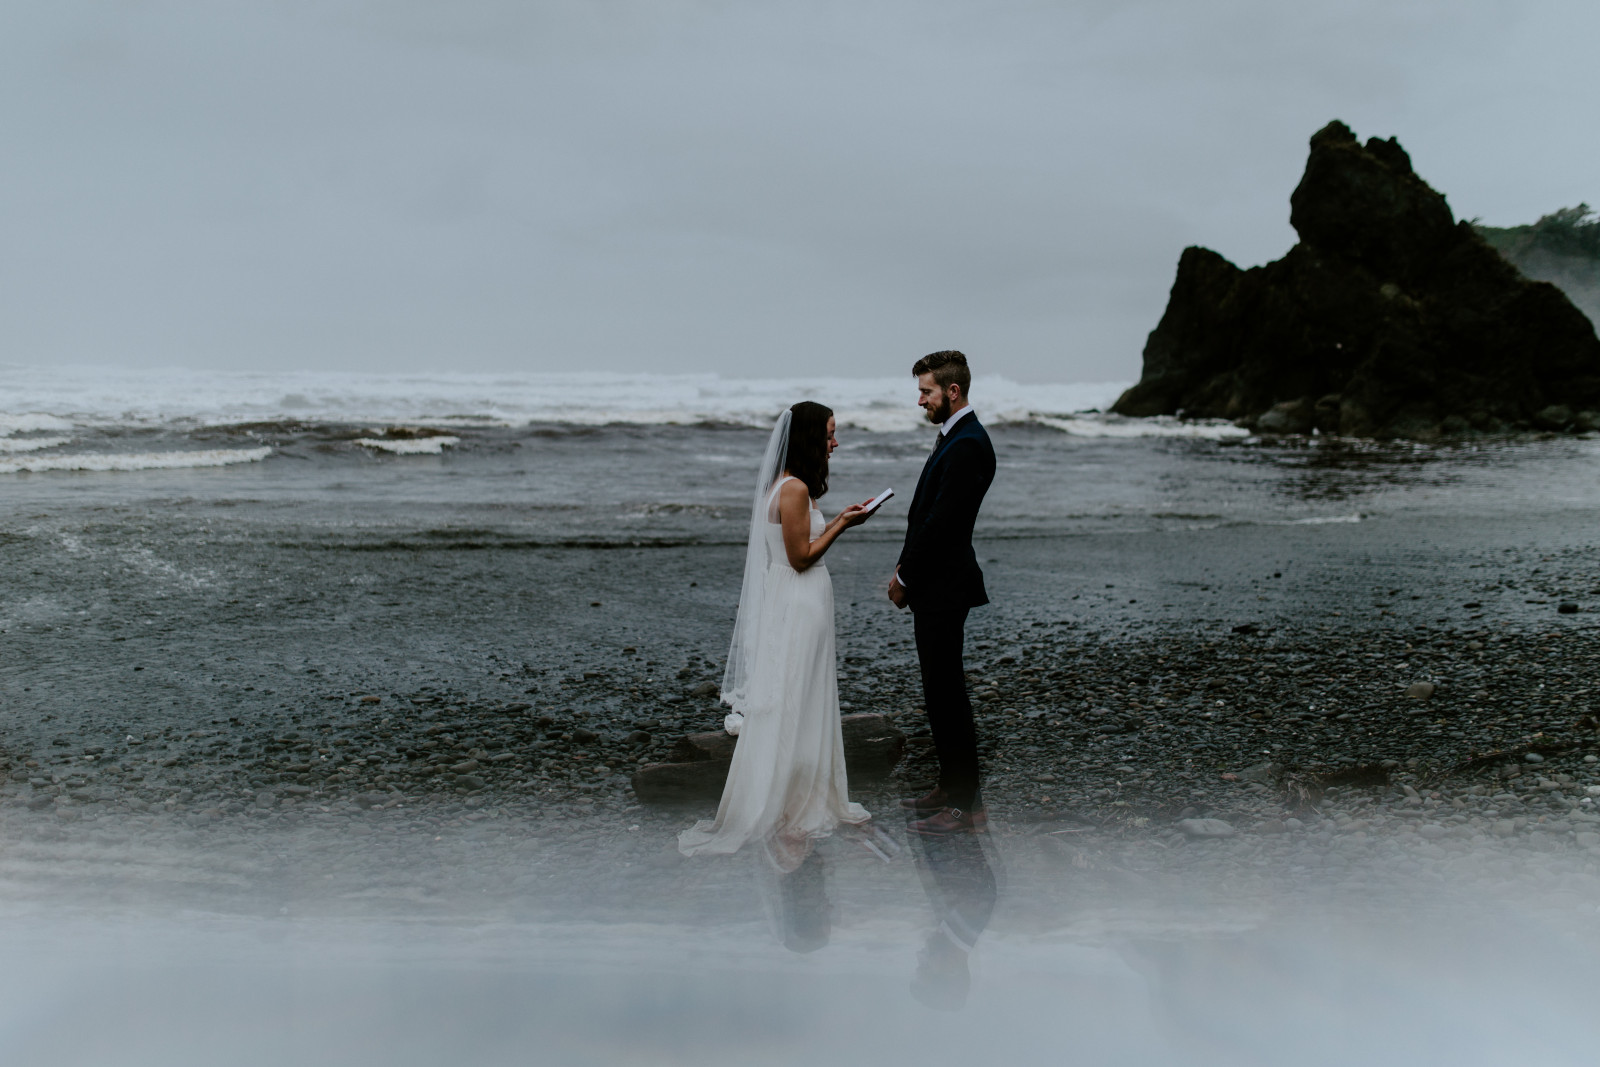 Mollie and Corey stand on the beach as they elope. Elopement photography in the Olympic National Park by Sienna Plus Josh.